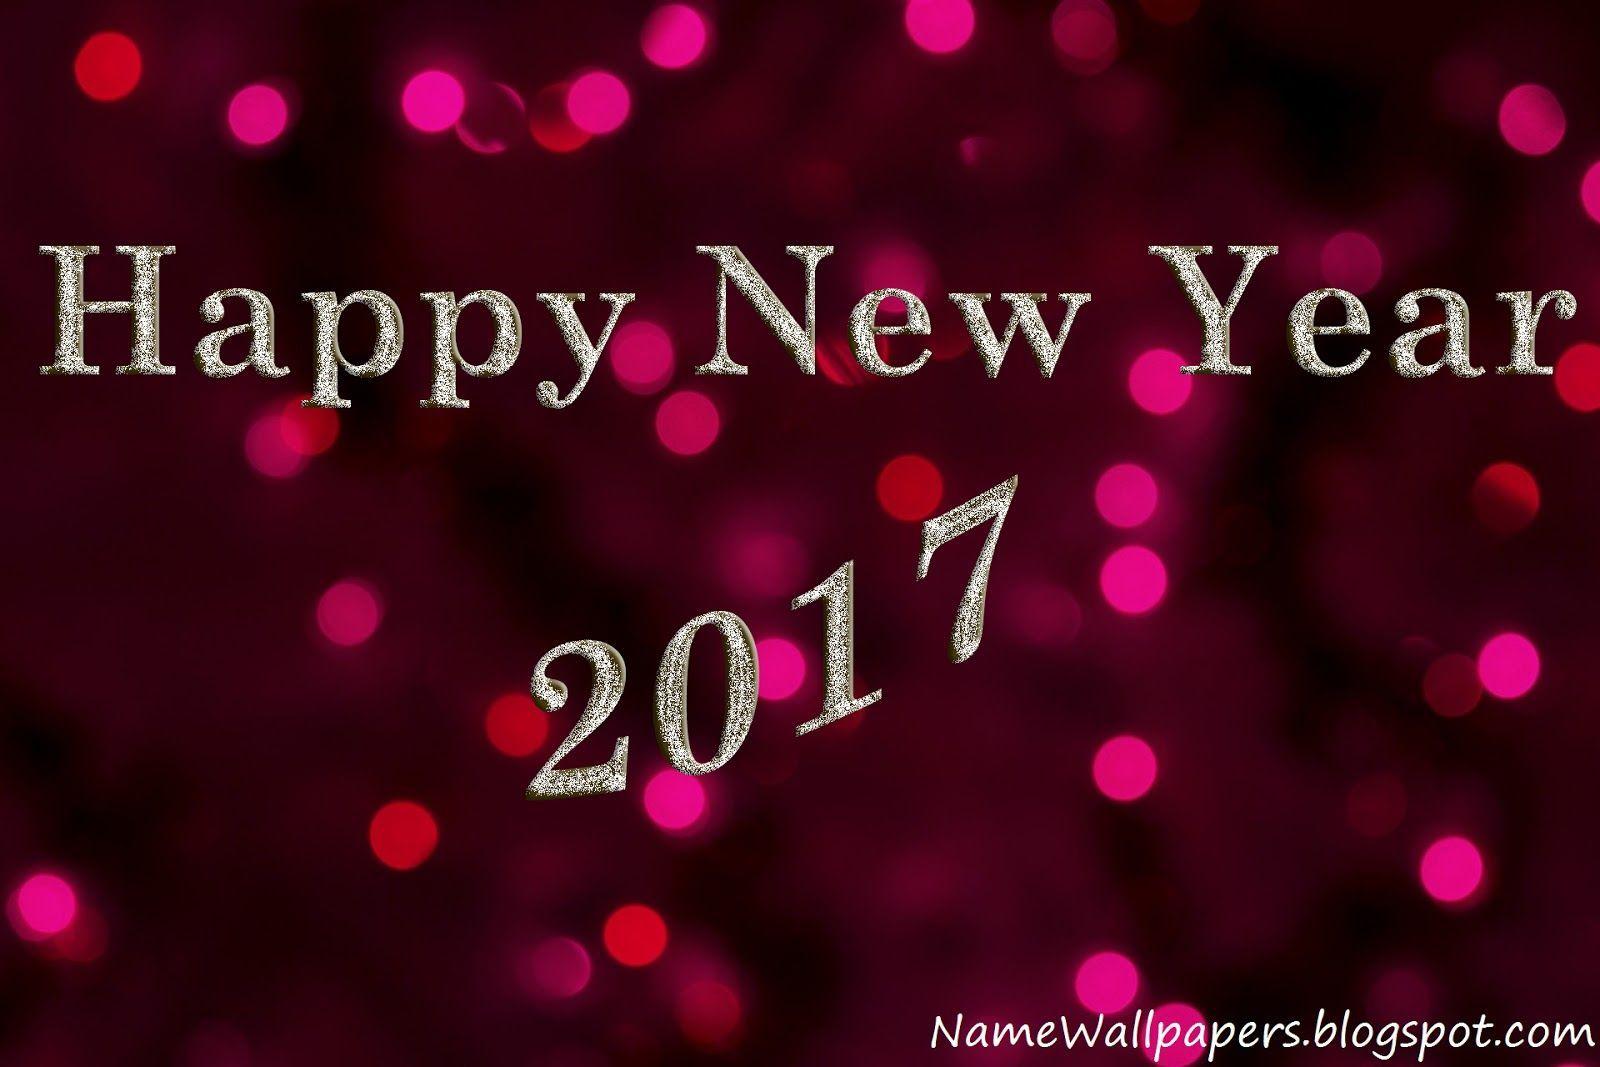 Happy New Year Wallpaper 2017 New Year&;s Eve Ideas For Couples